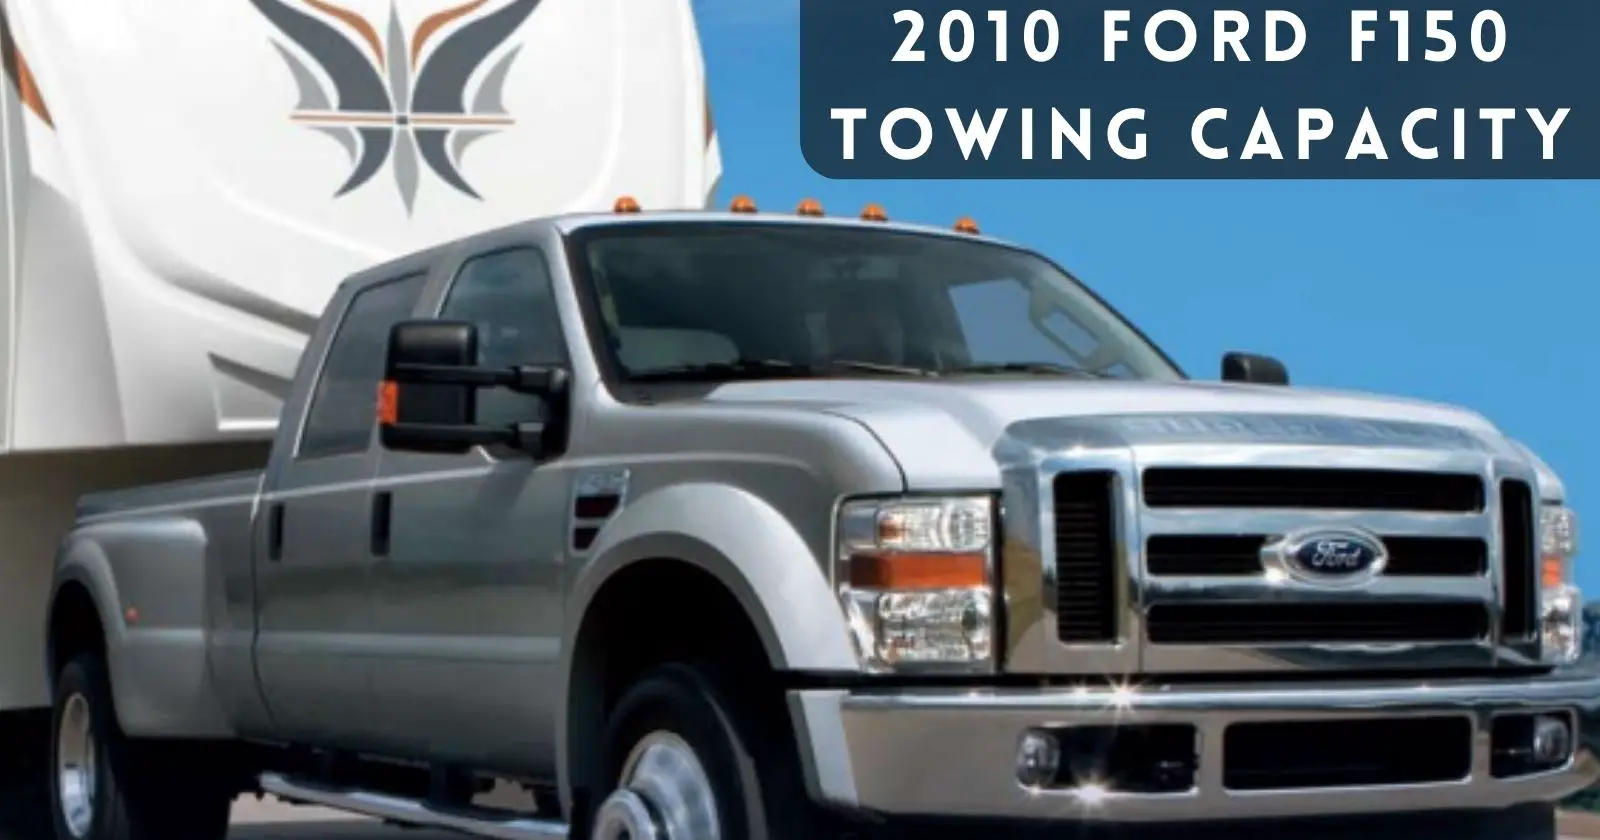 discover-towing-capacity-of-2010-ford-f150-thecartowing